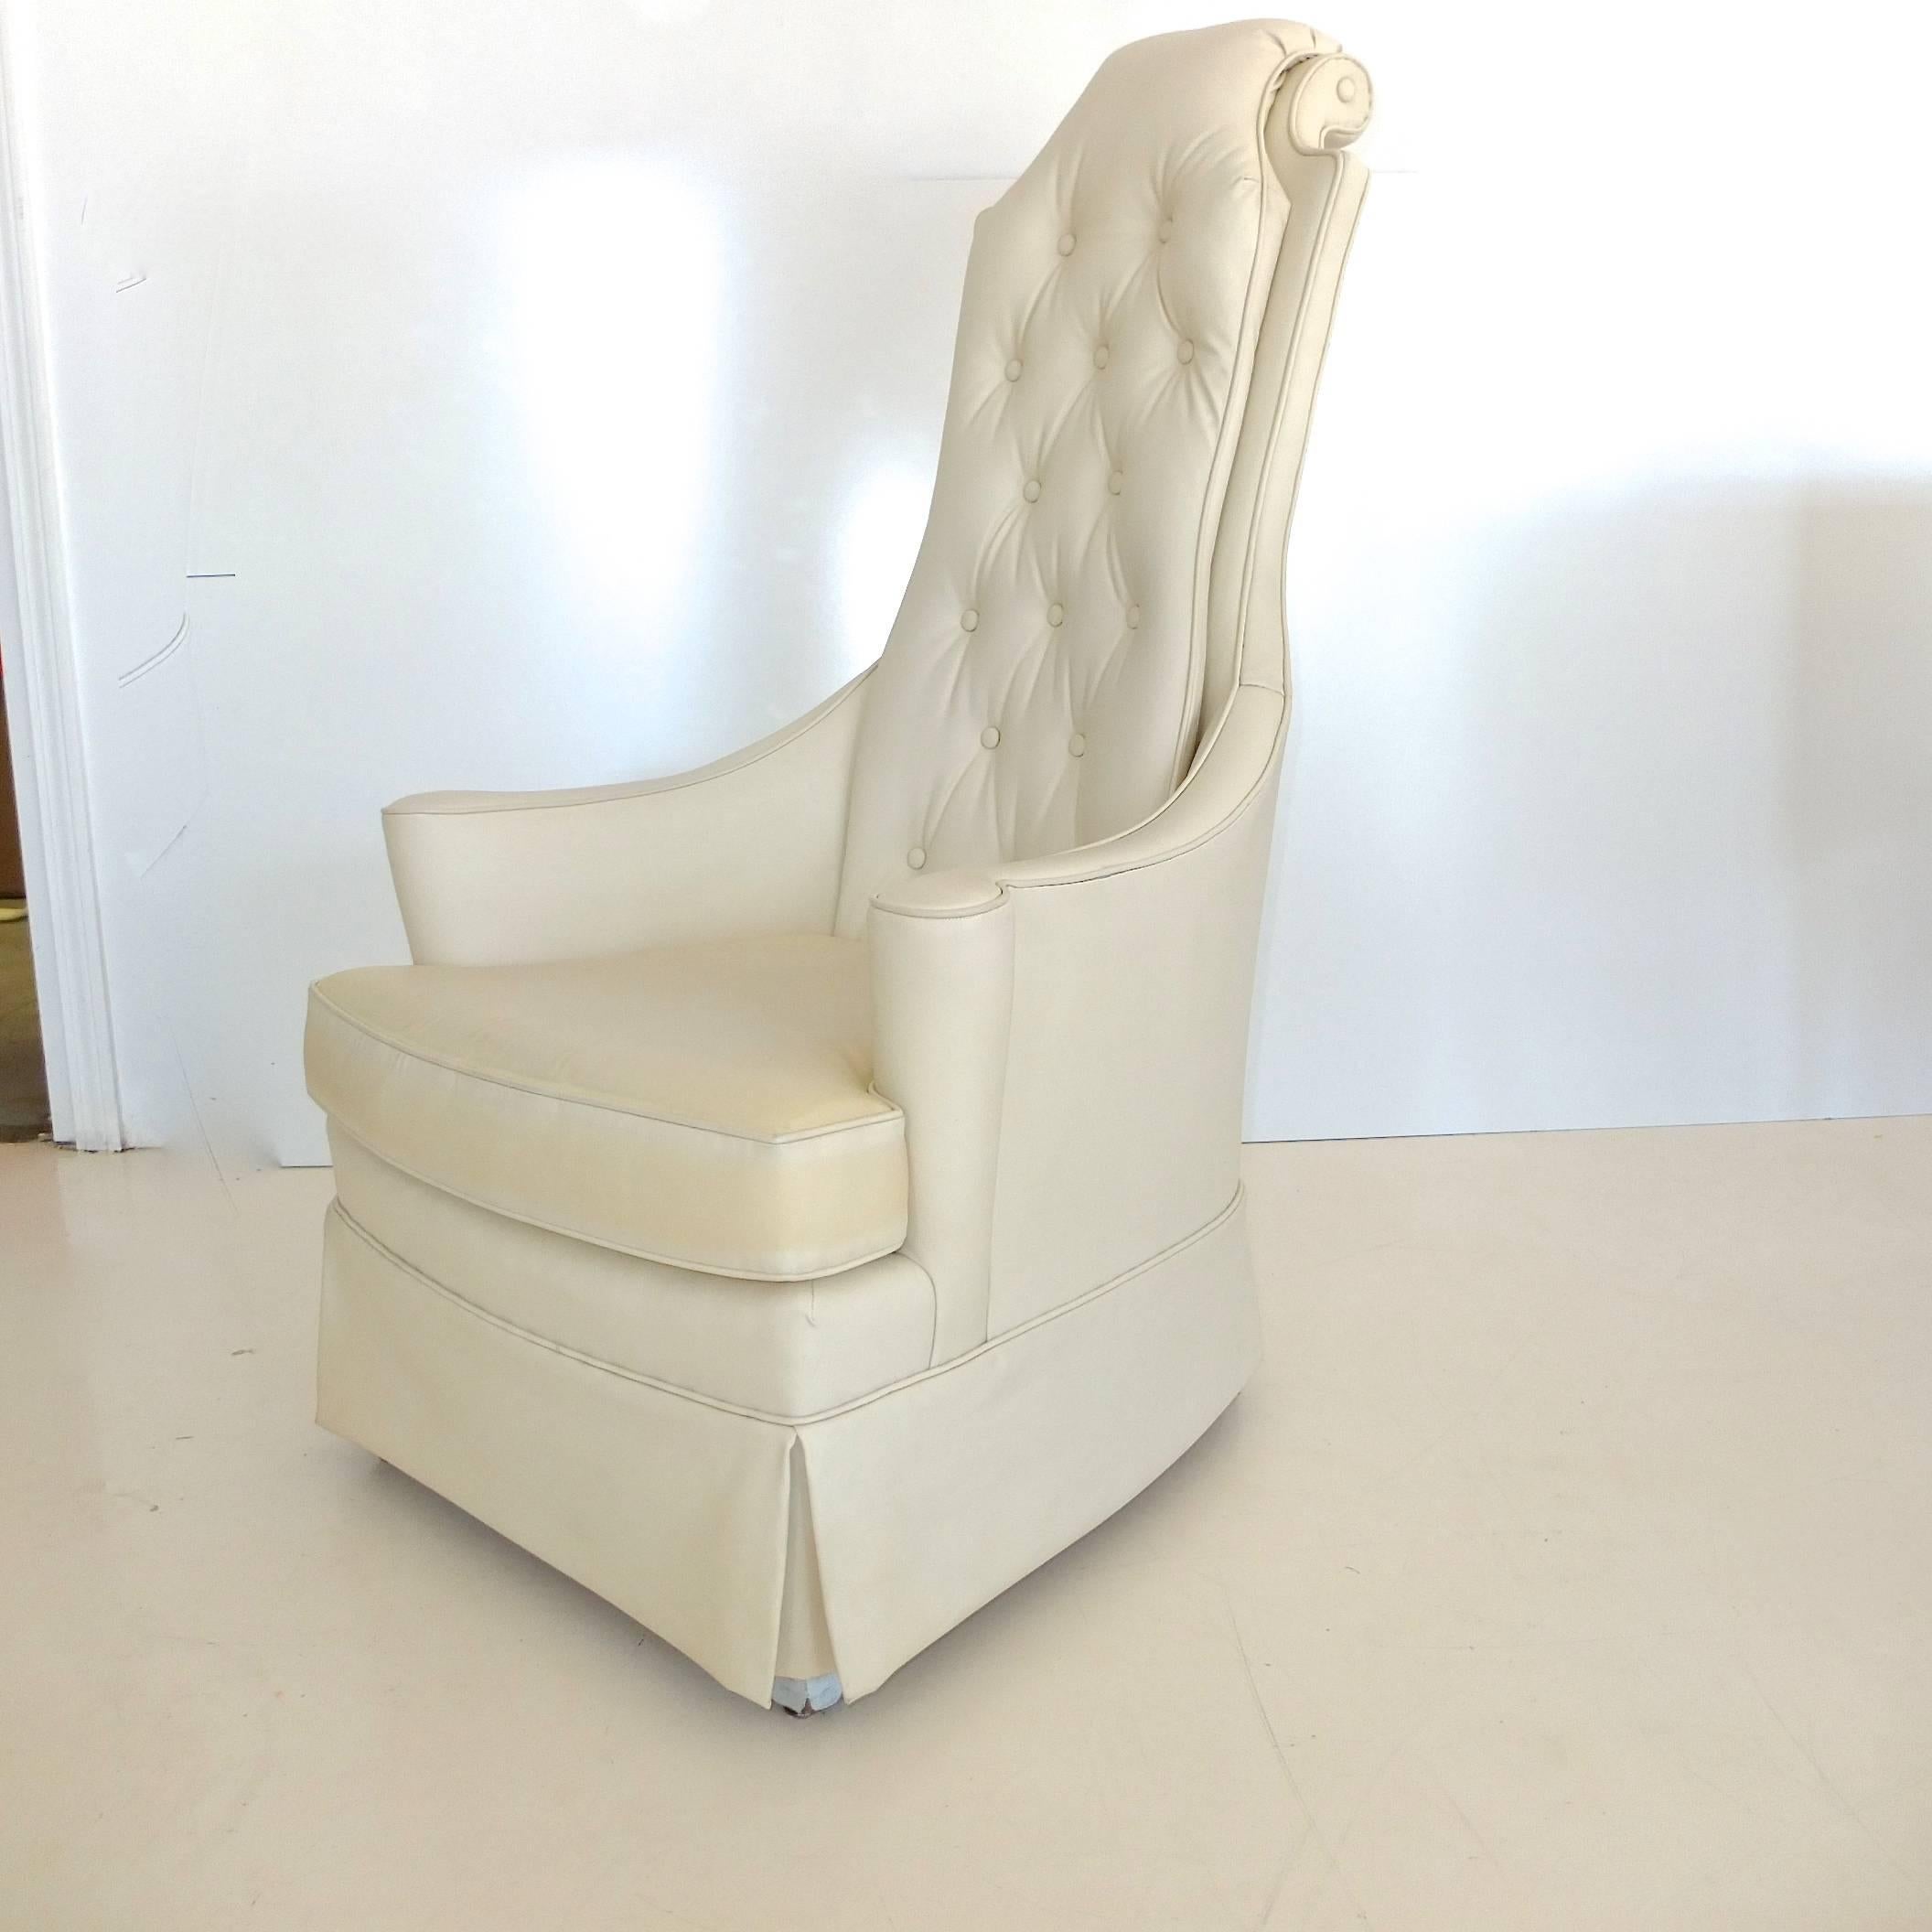 Hollywood Regency High Back Lounge Chair In Good Condition For Sale In Hanover, MA